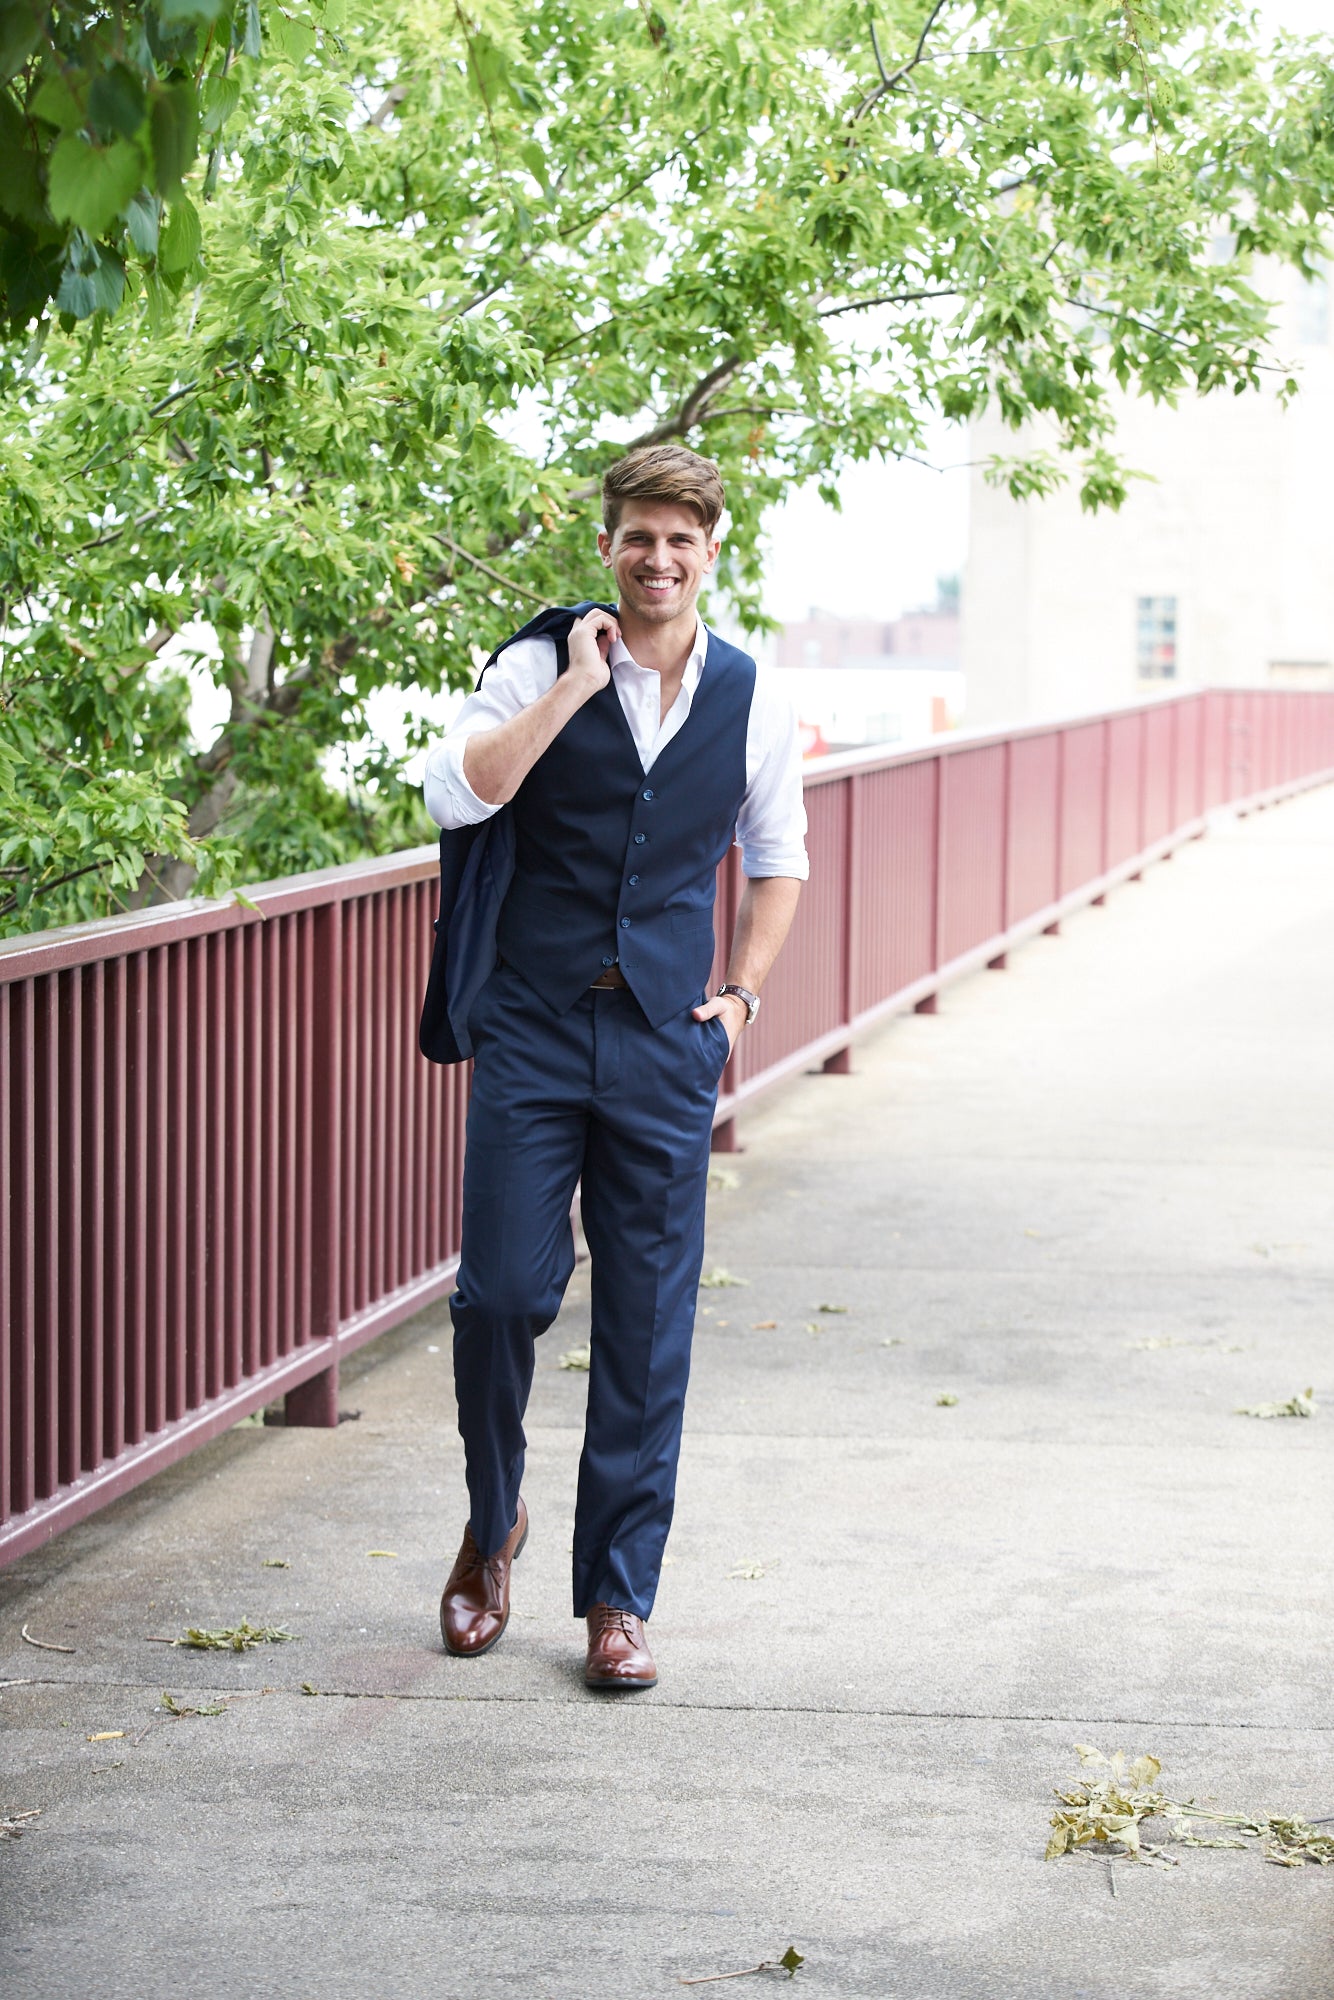 shoes to wear with navy blue suit